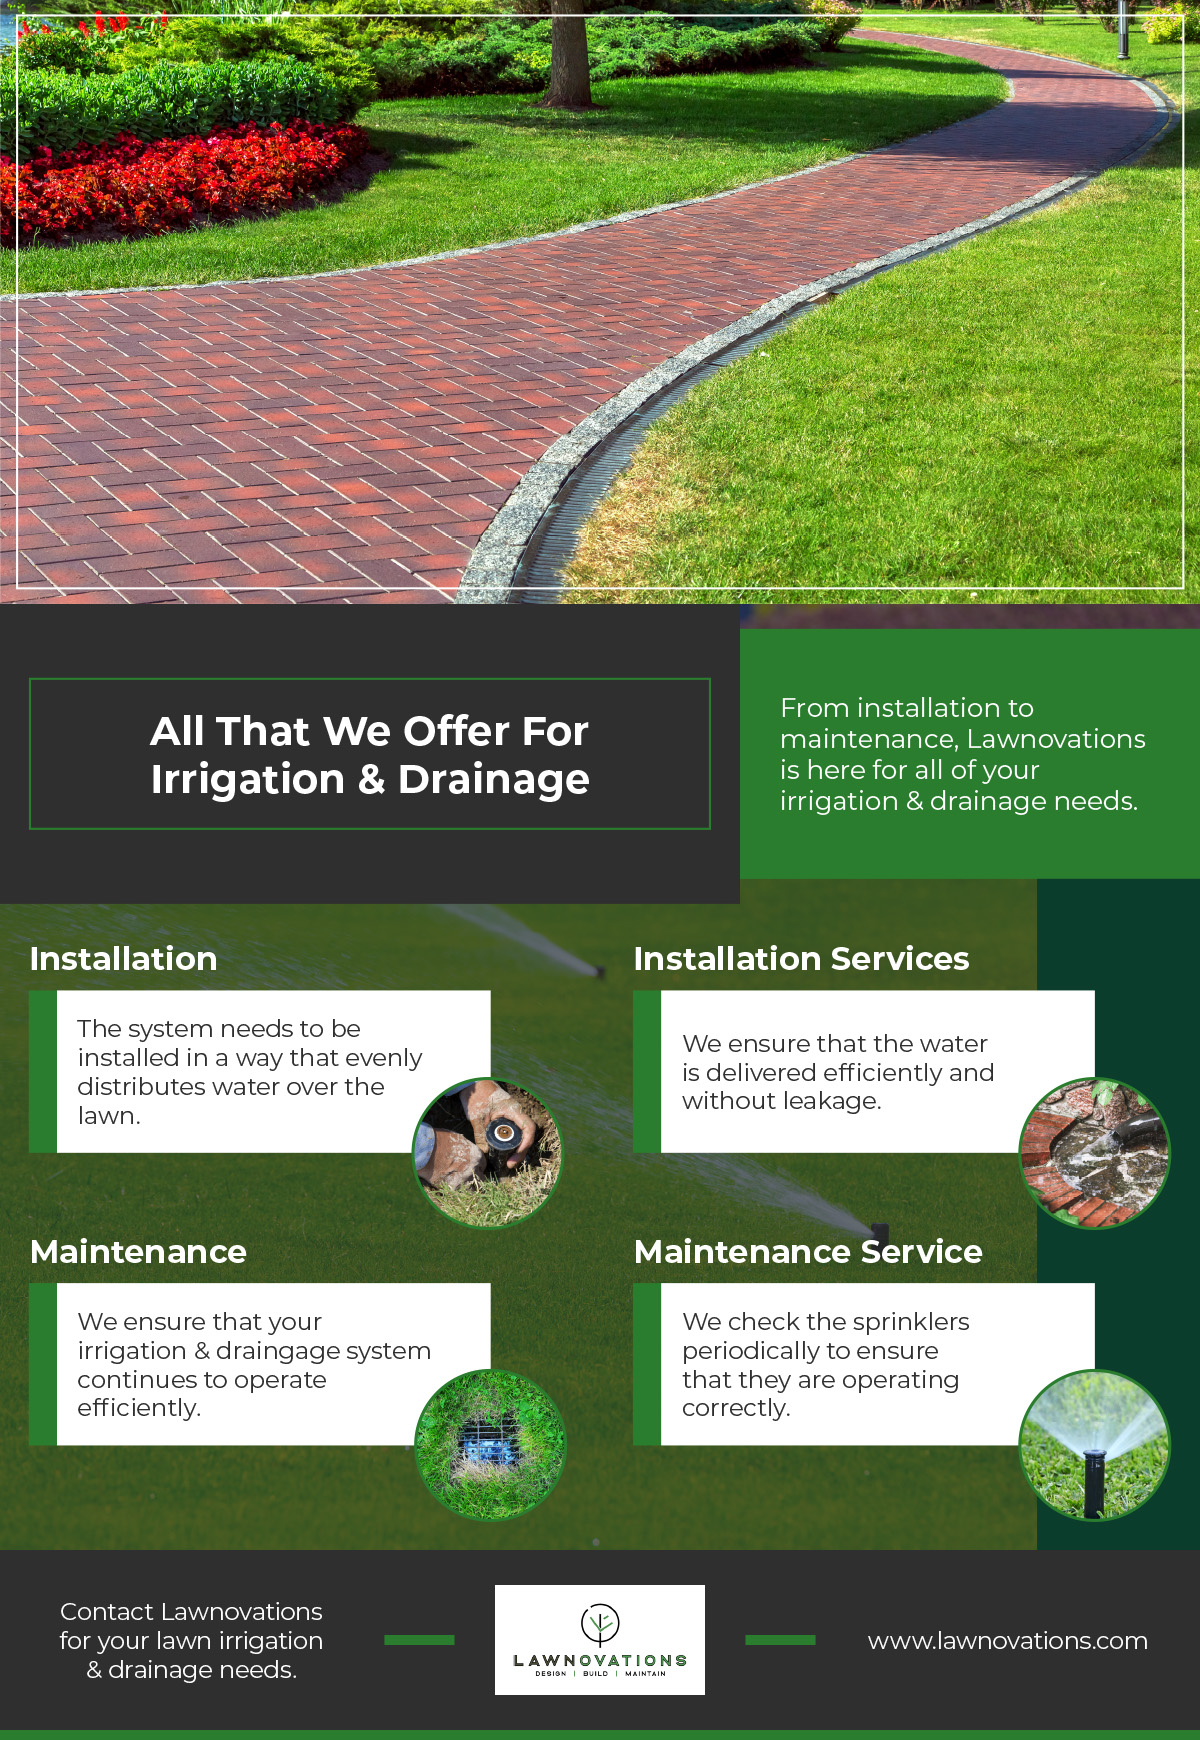 All That We Offer For Irrigation & Drainage Infographic